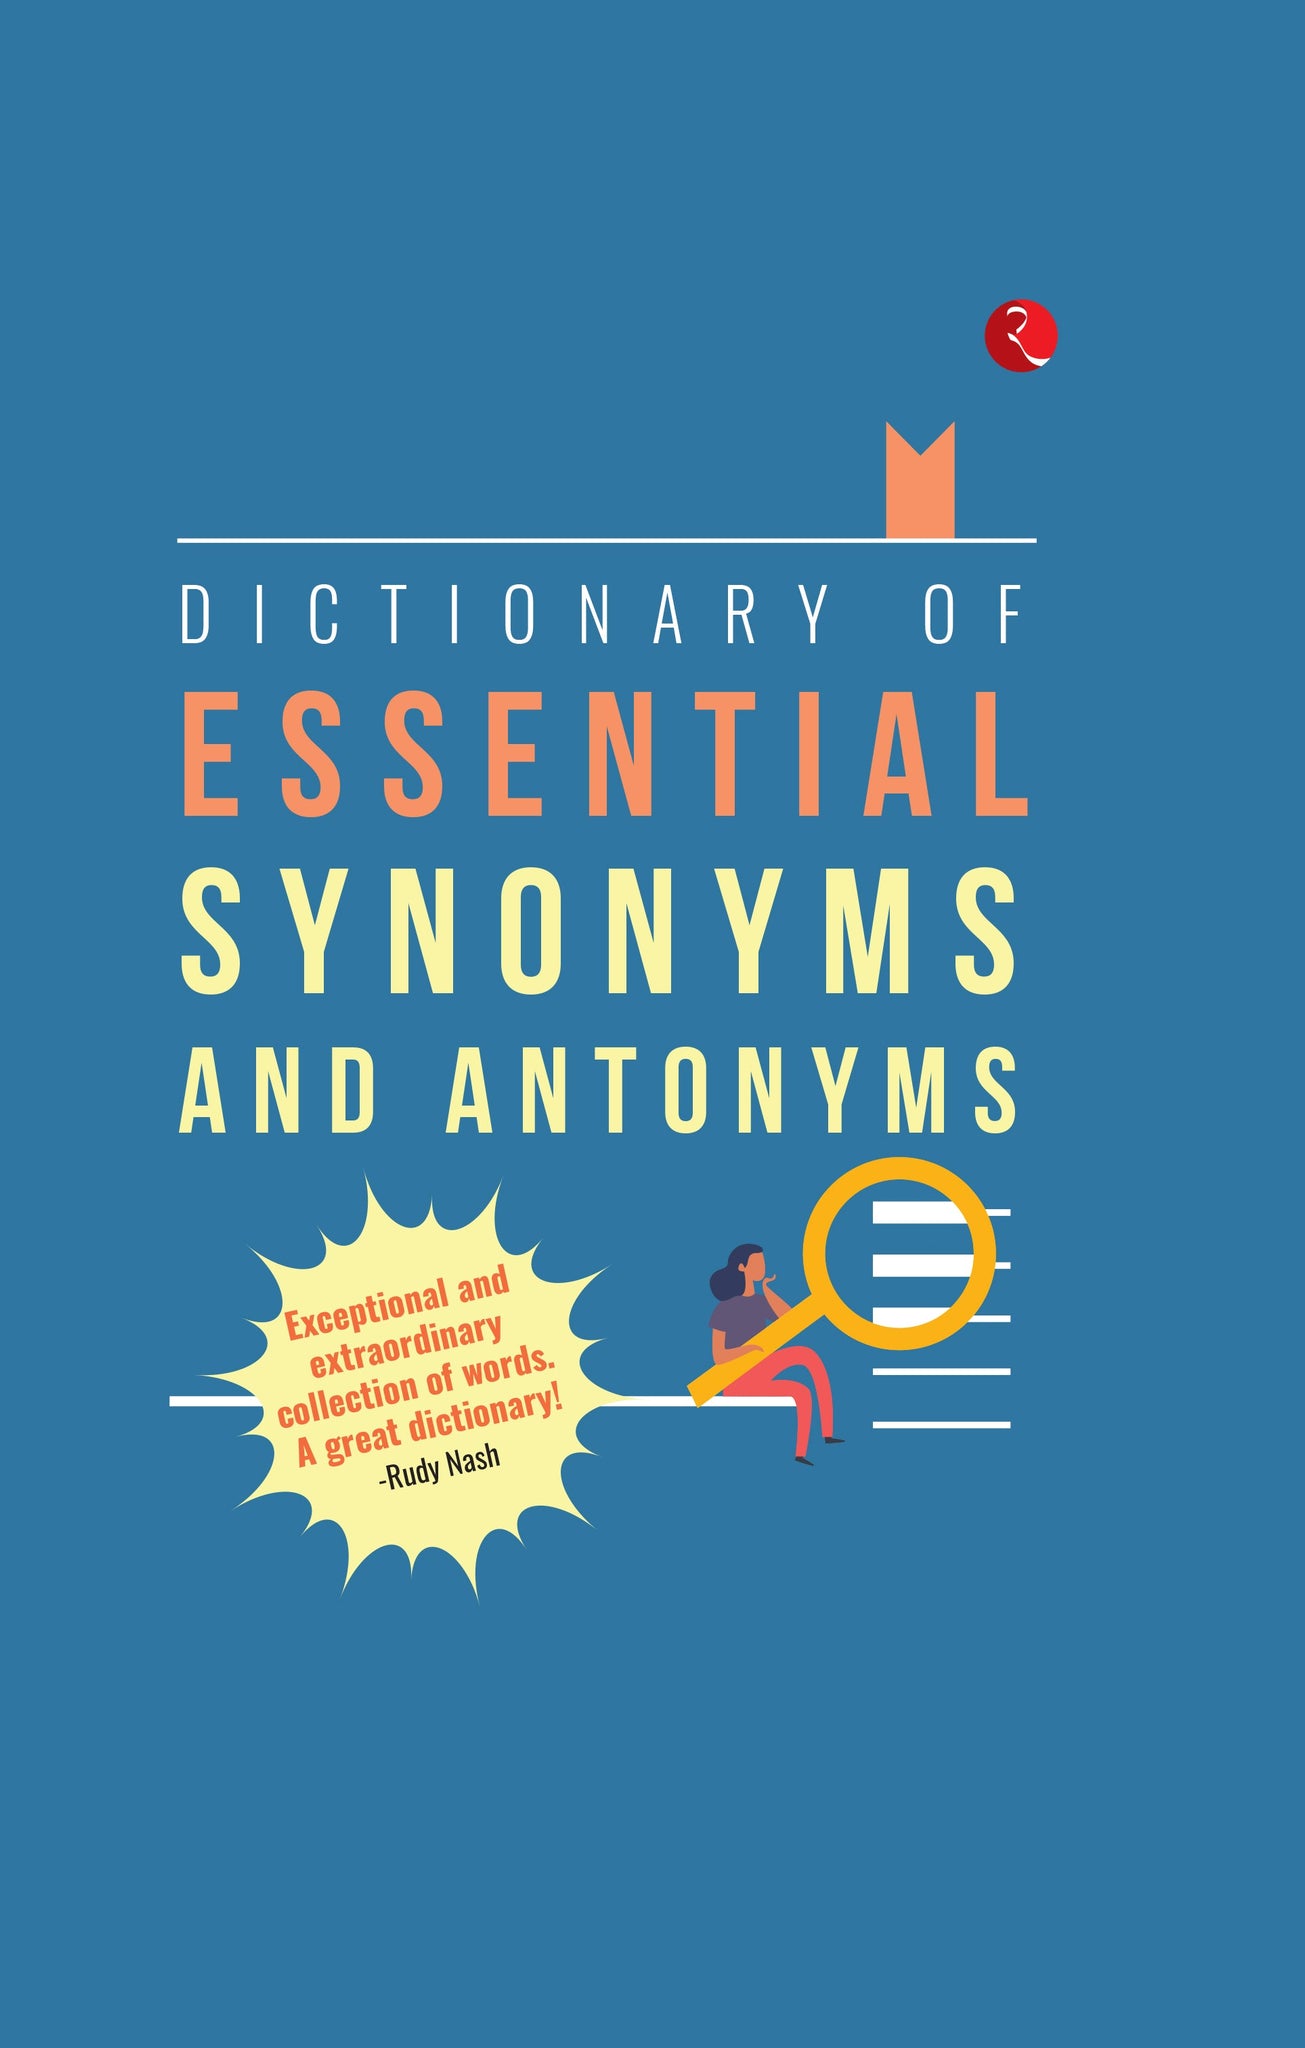 DICTIONARY OF ESSENTIAL SYNONYMS AND ANTONYMS